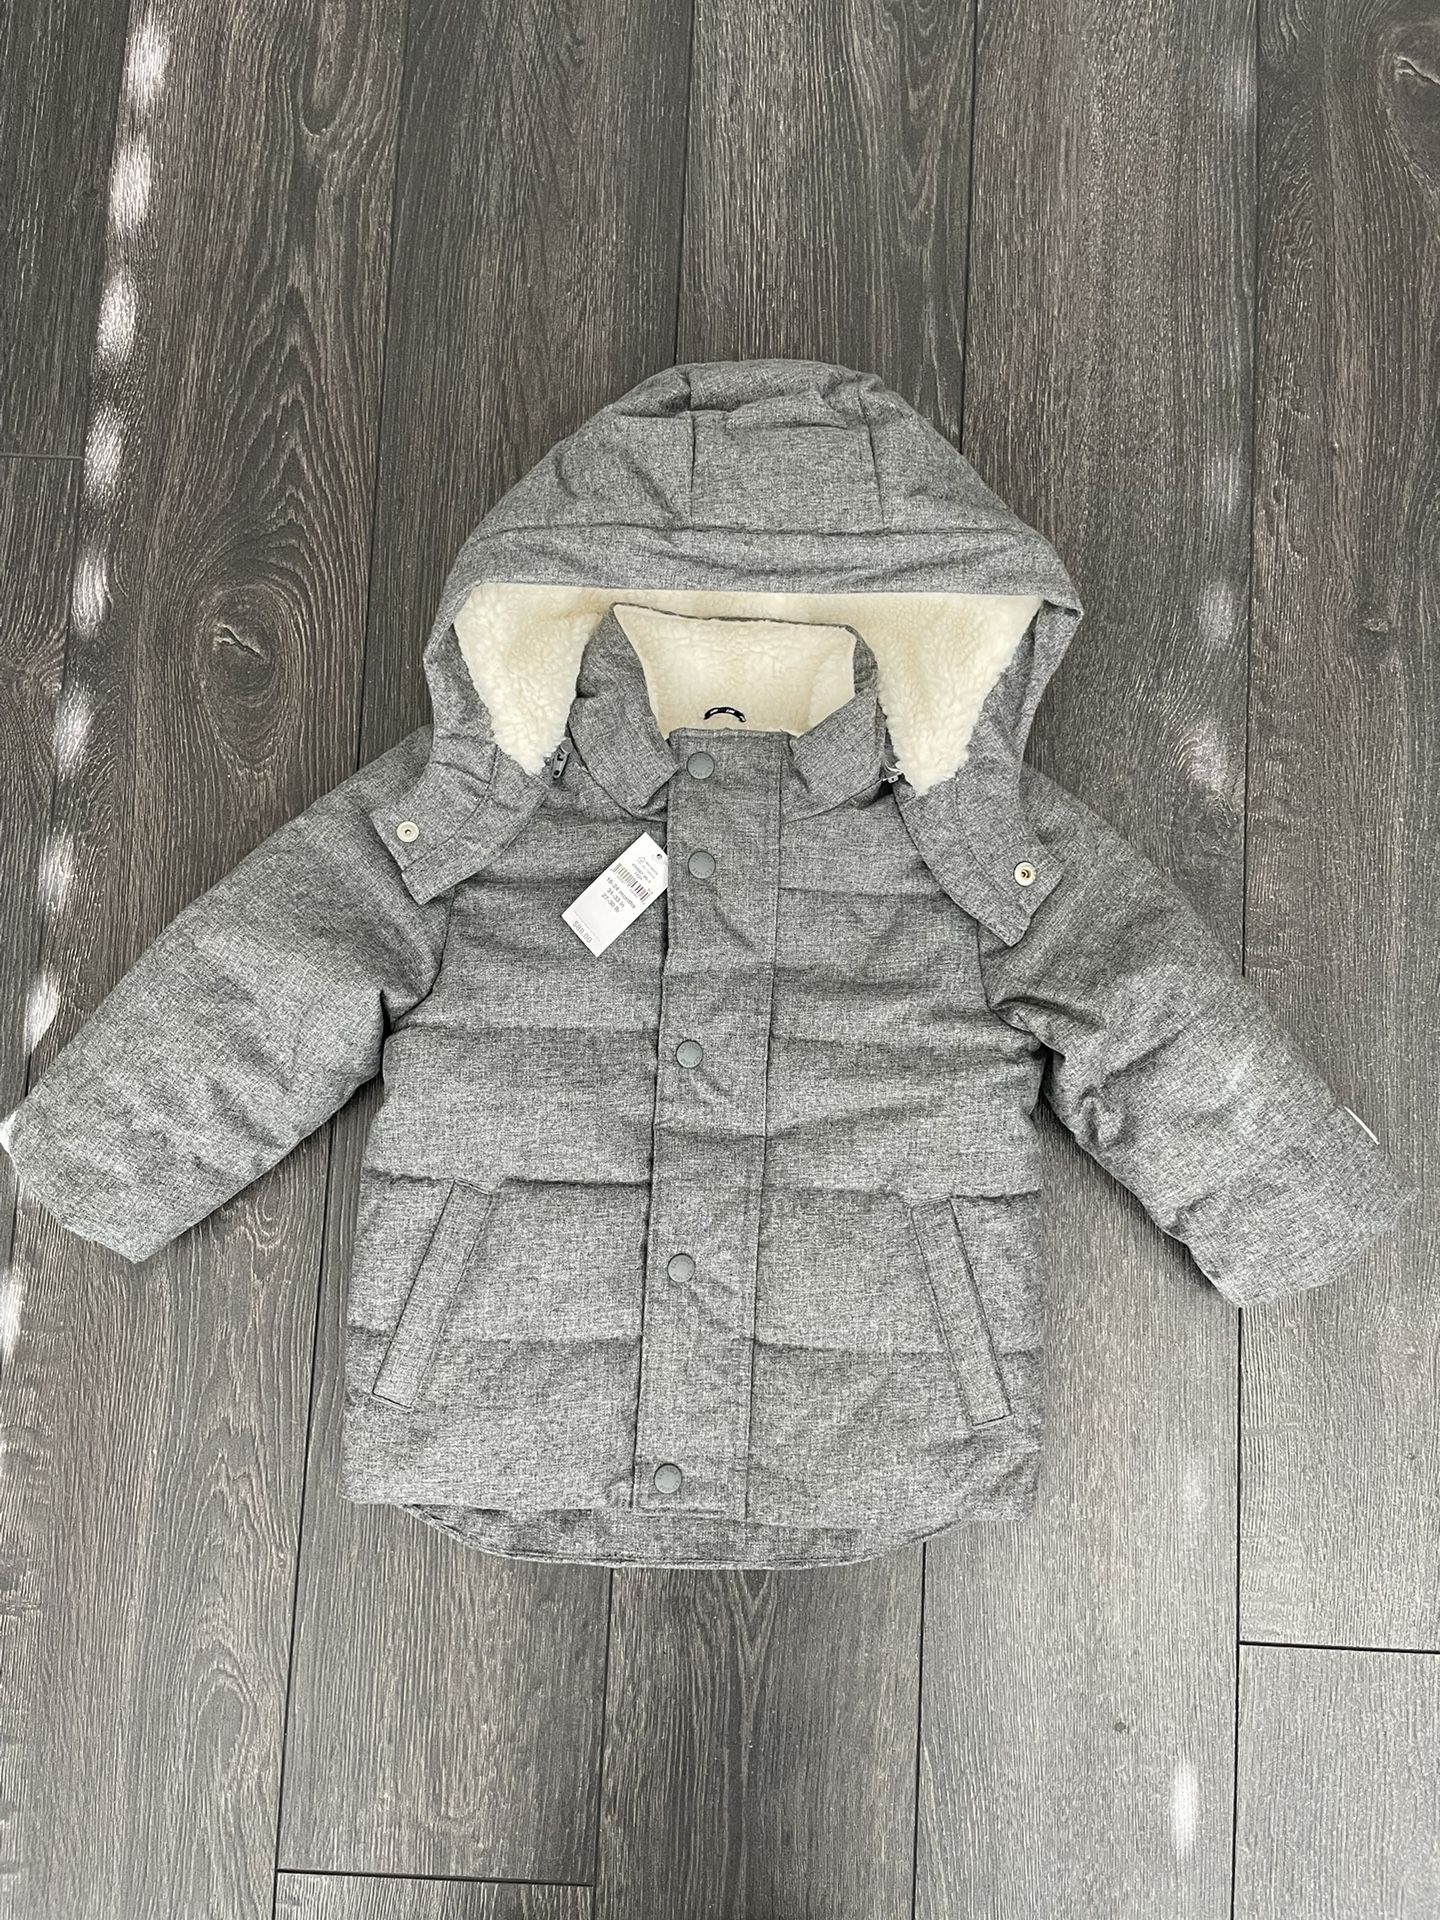 Brand New Gray GAP Toddler Coat Sherpa Lined 18-24 Month Winter Spring Jacket